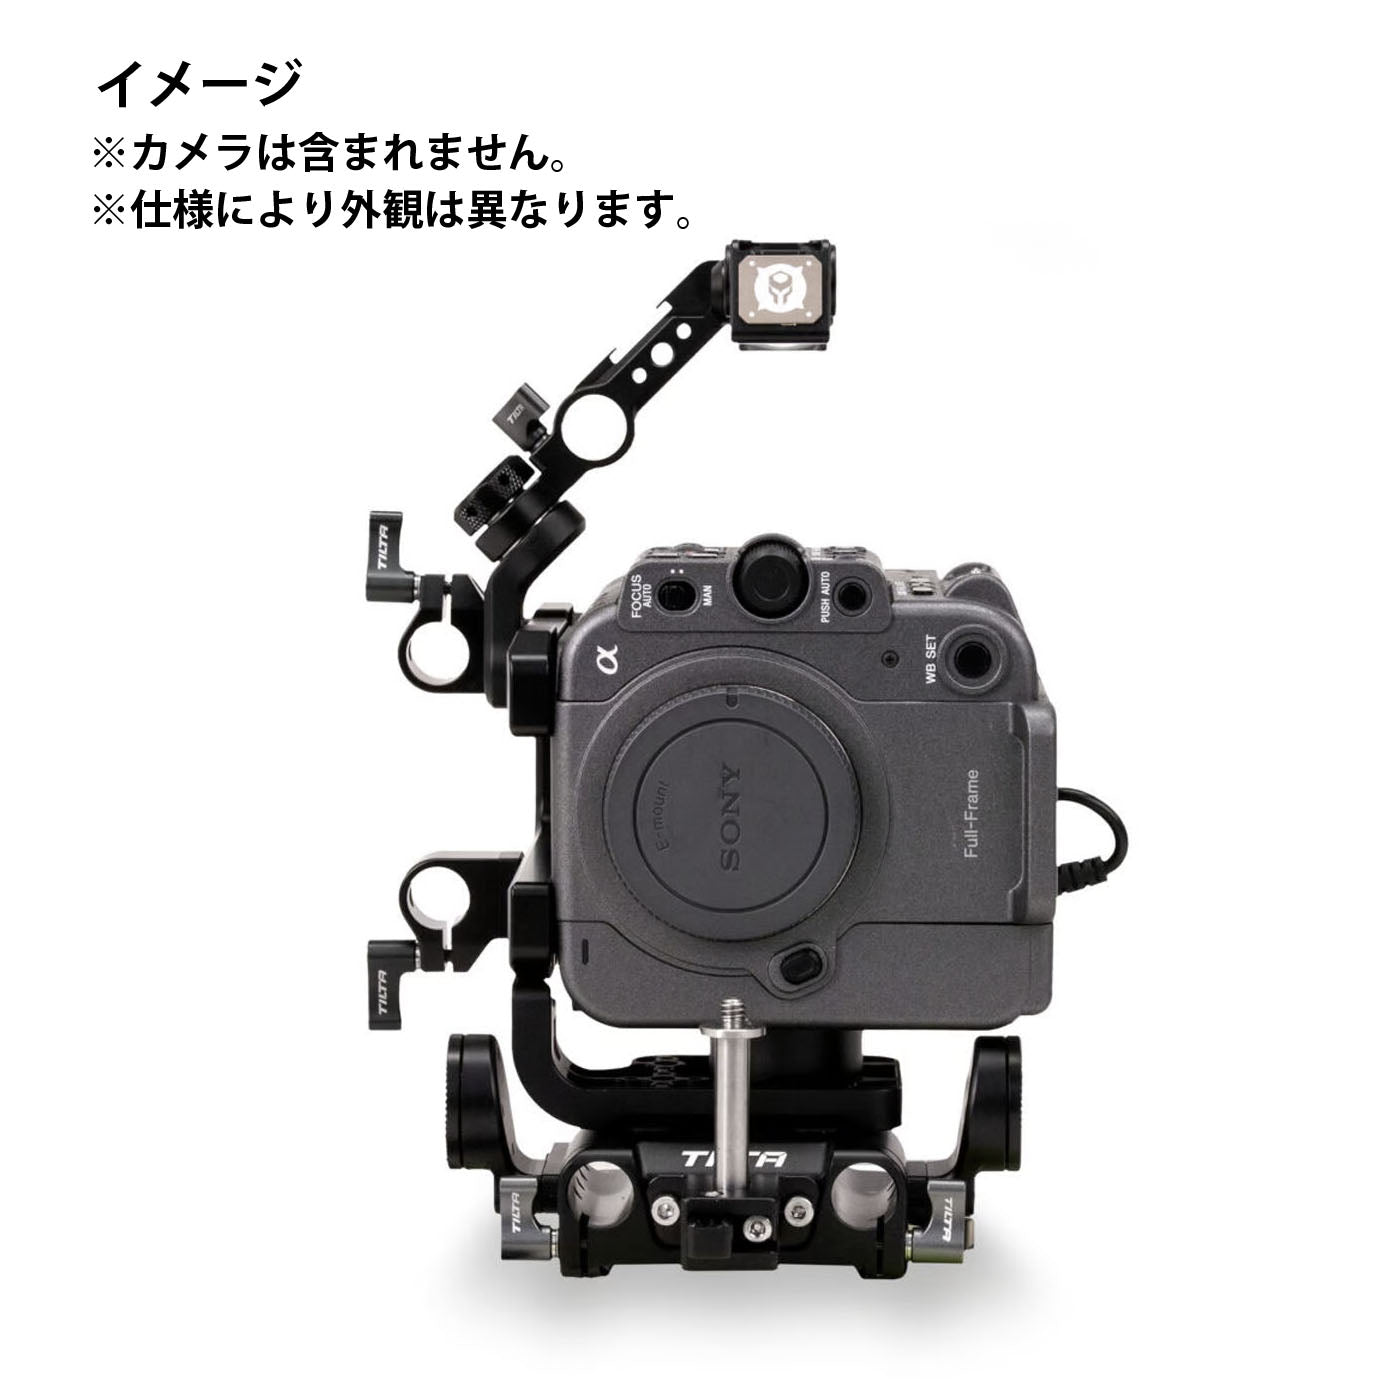 TILTA(ティルタ) Camera Cage for Sony FX6 Vertical Mounting Kit - Gold Mount(アントンマウント) ES-T20-C-AB